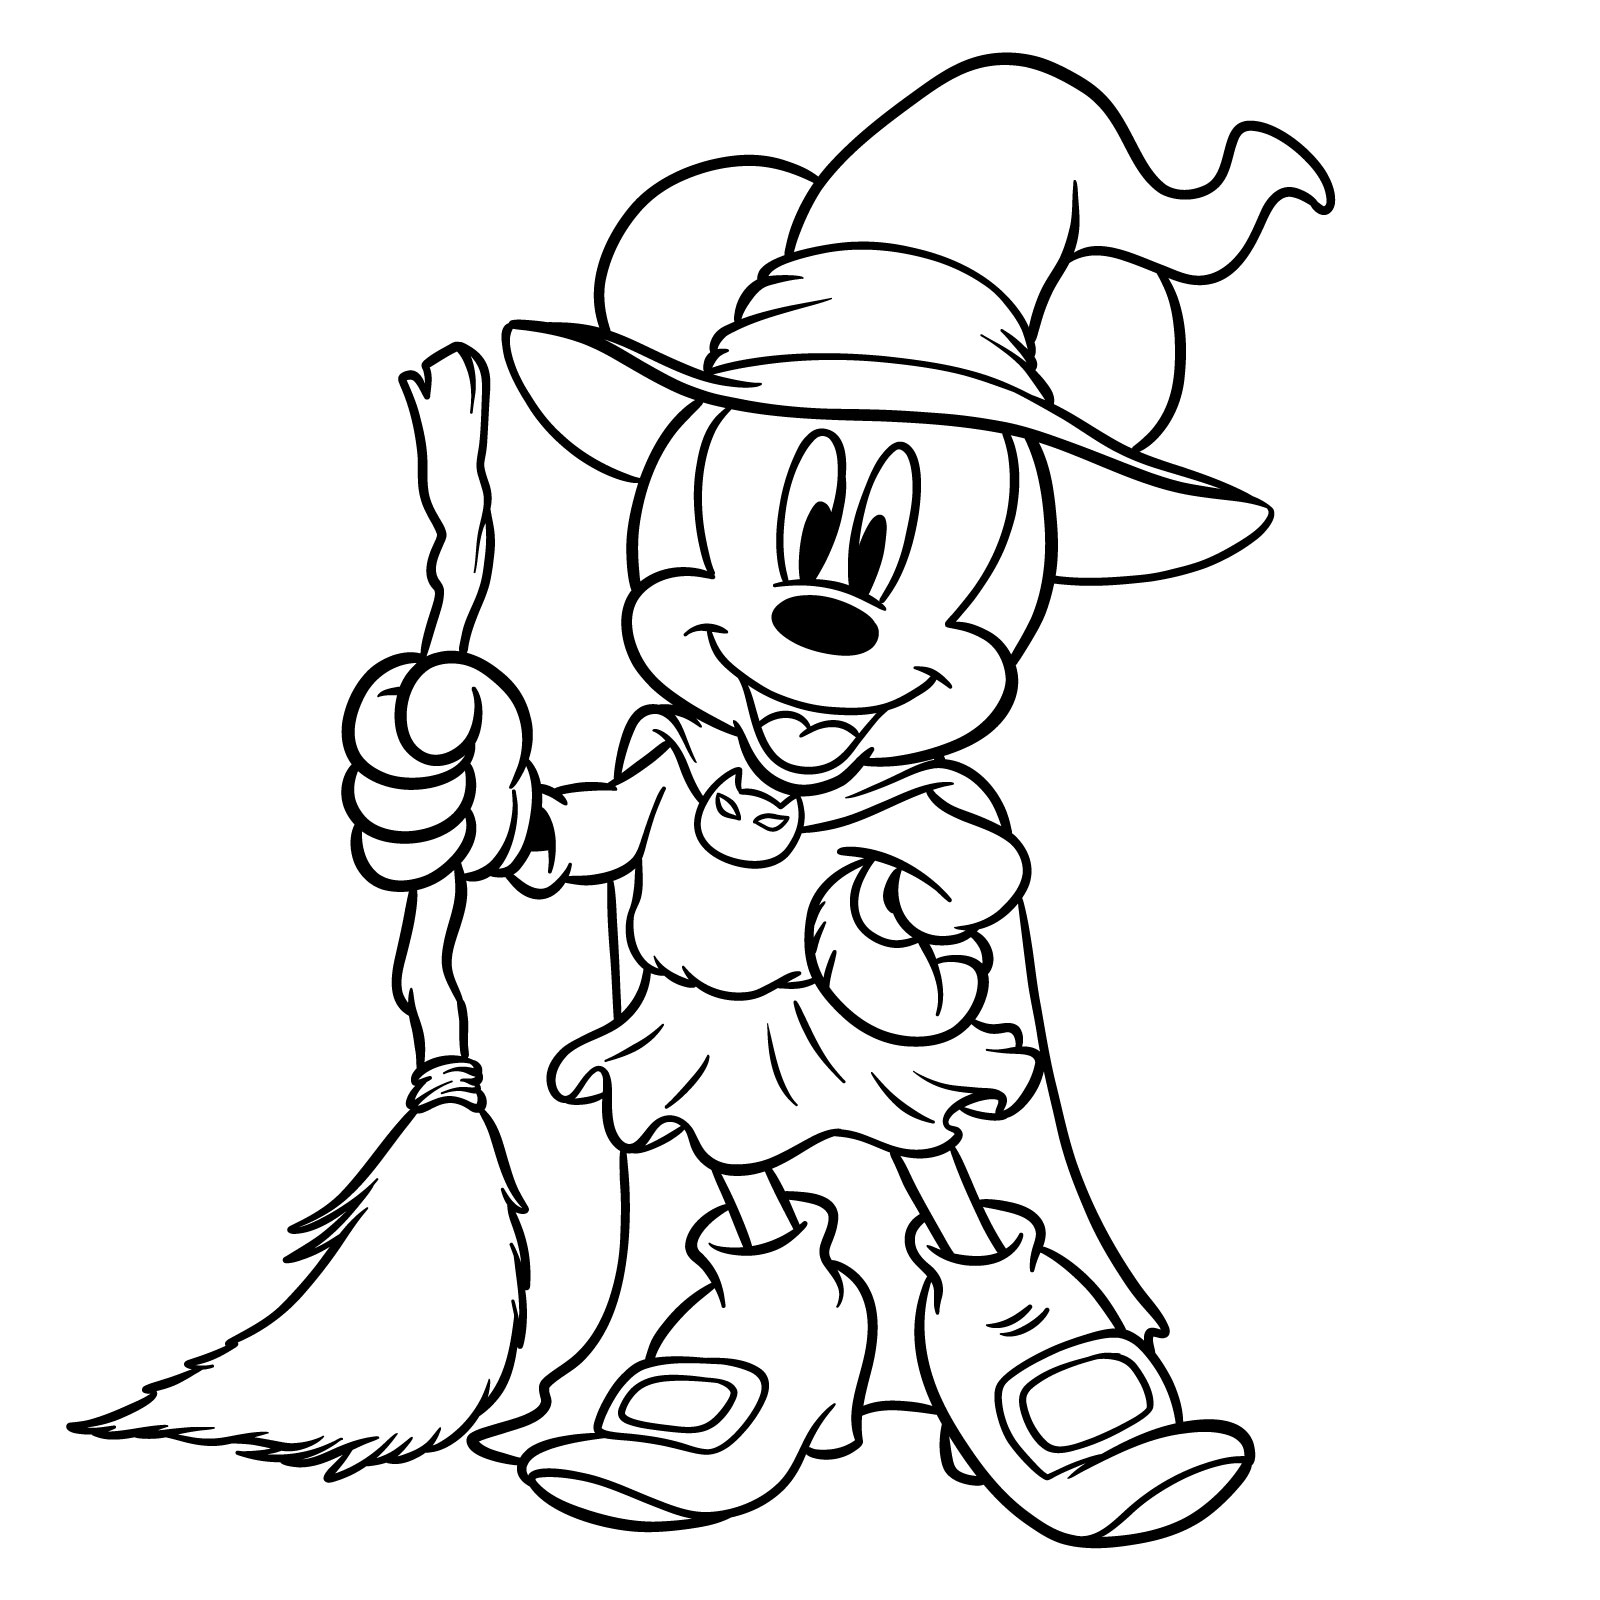 How to draw Halloween Minnie Mouse as a witch - final step